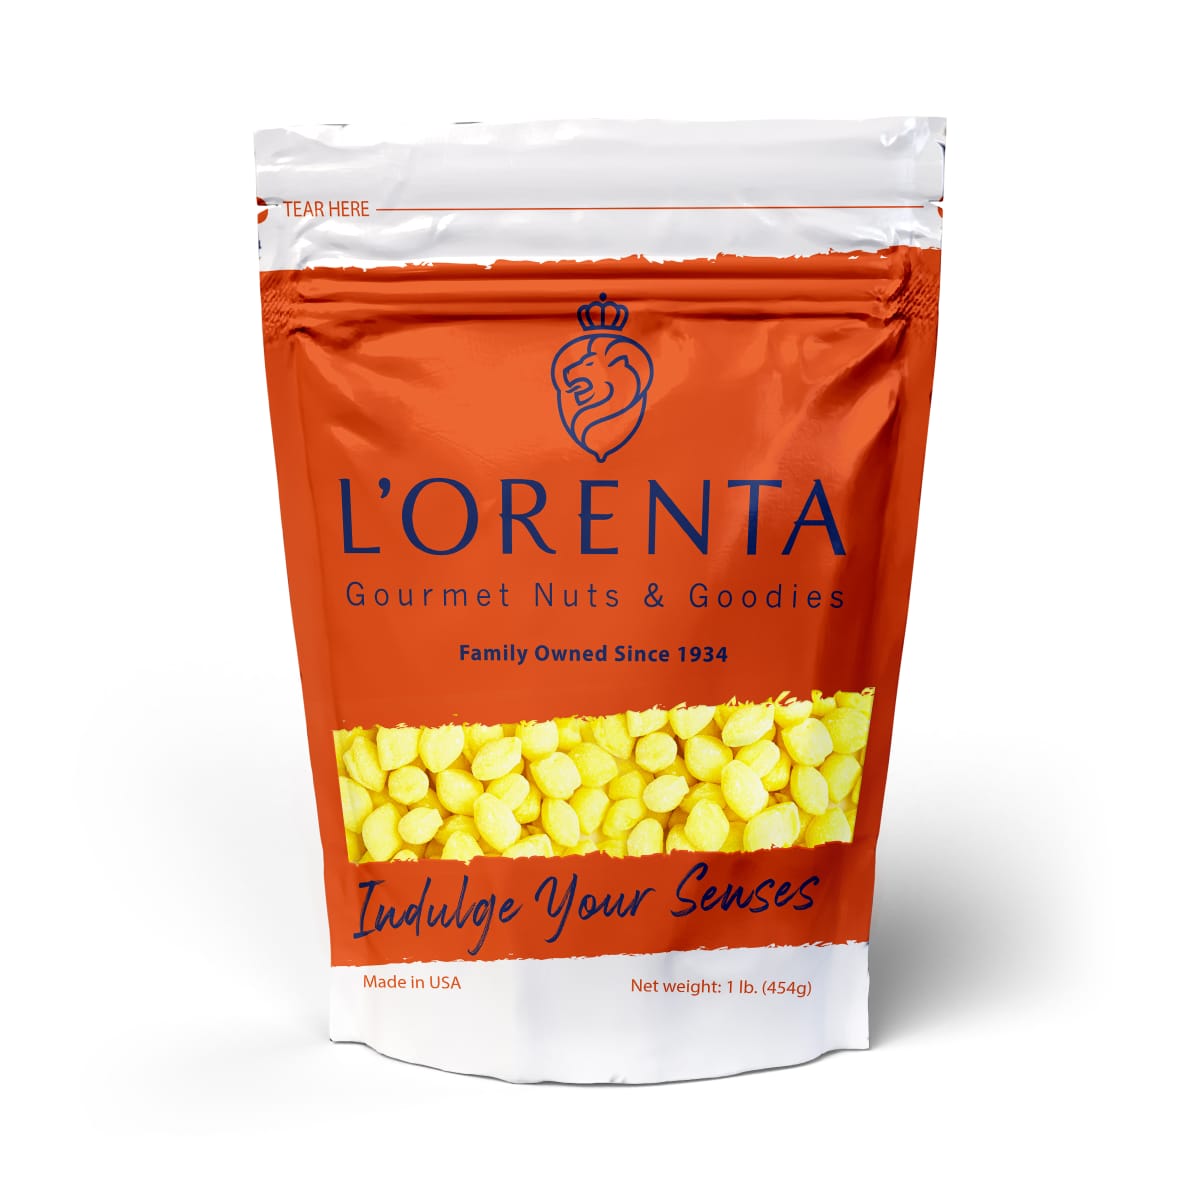 Lemon Drops Hard Candy by the Pound or Bulk Cases